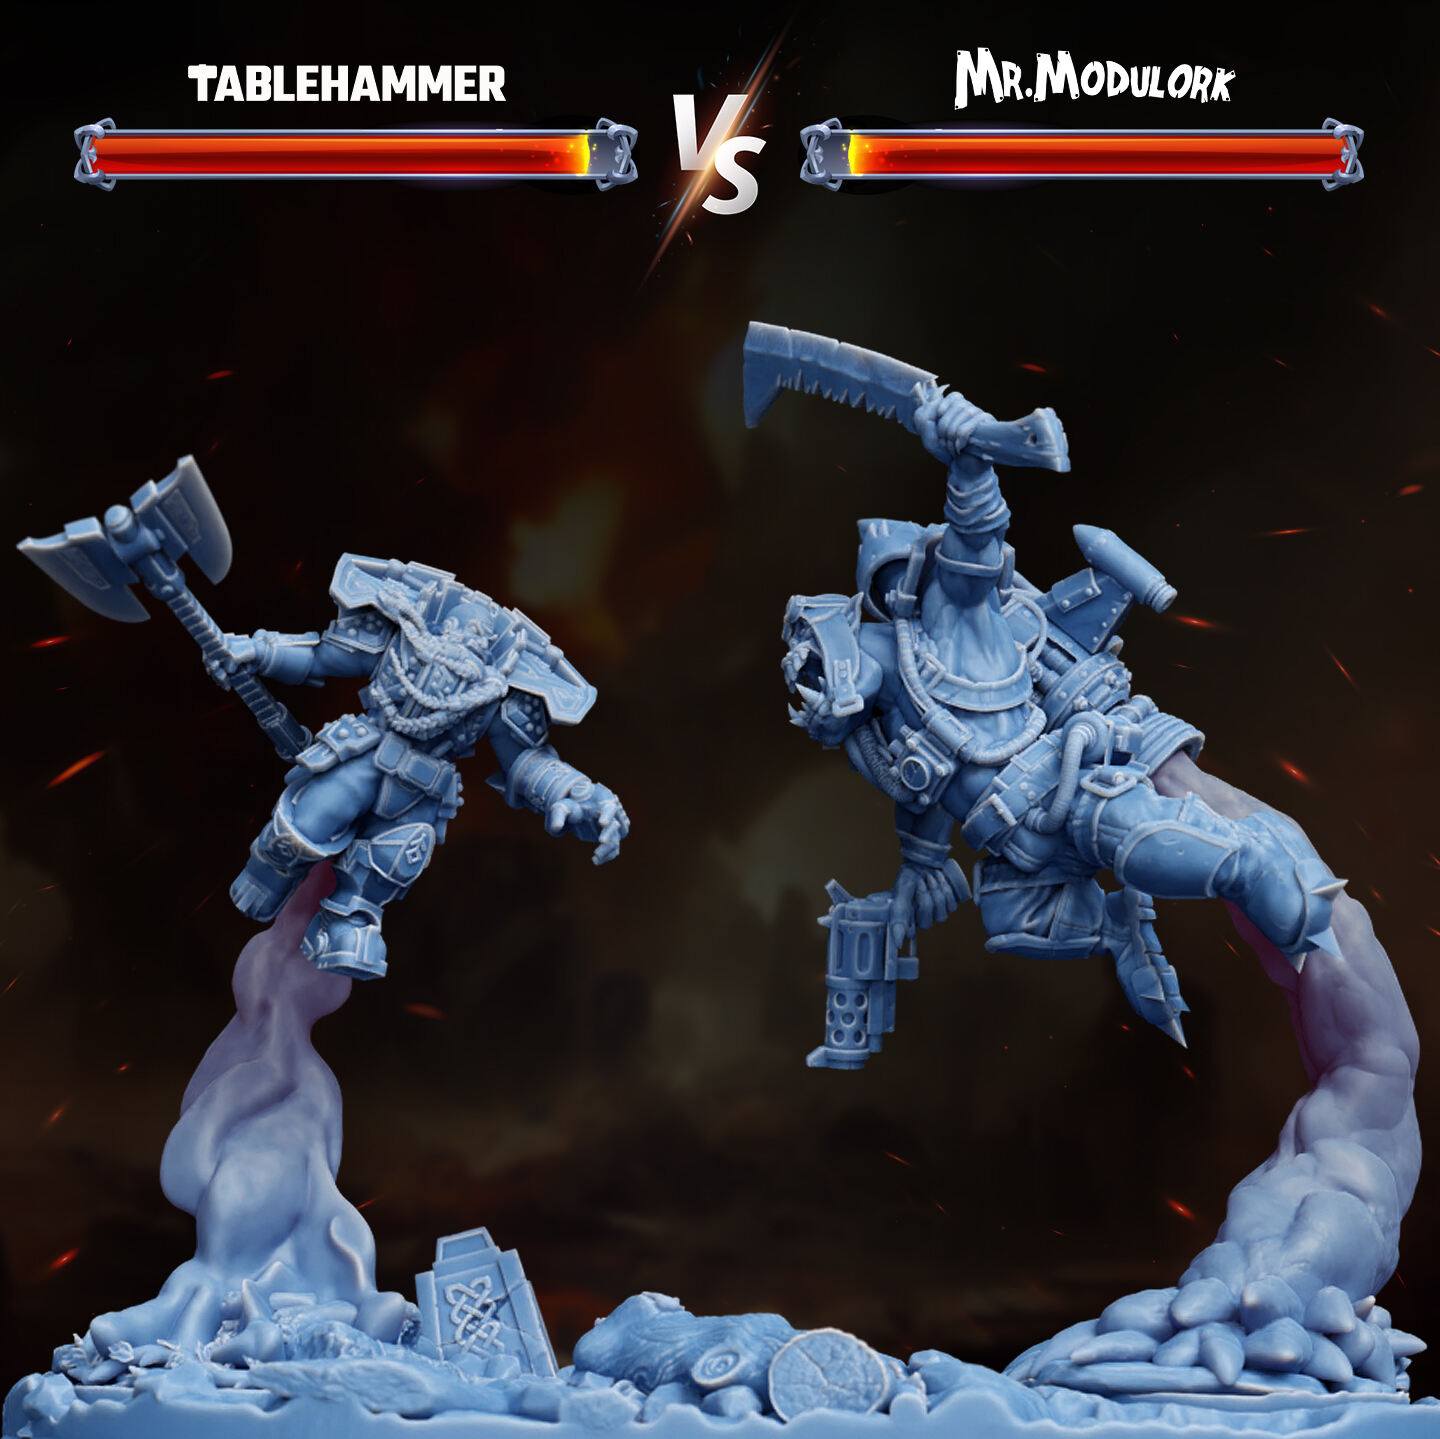 Duel in the stratosphere - Dwarf vs. Orc - MrModulorc collab